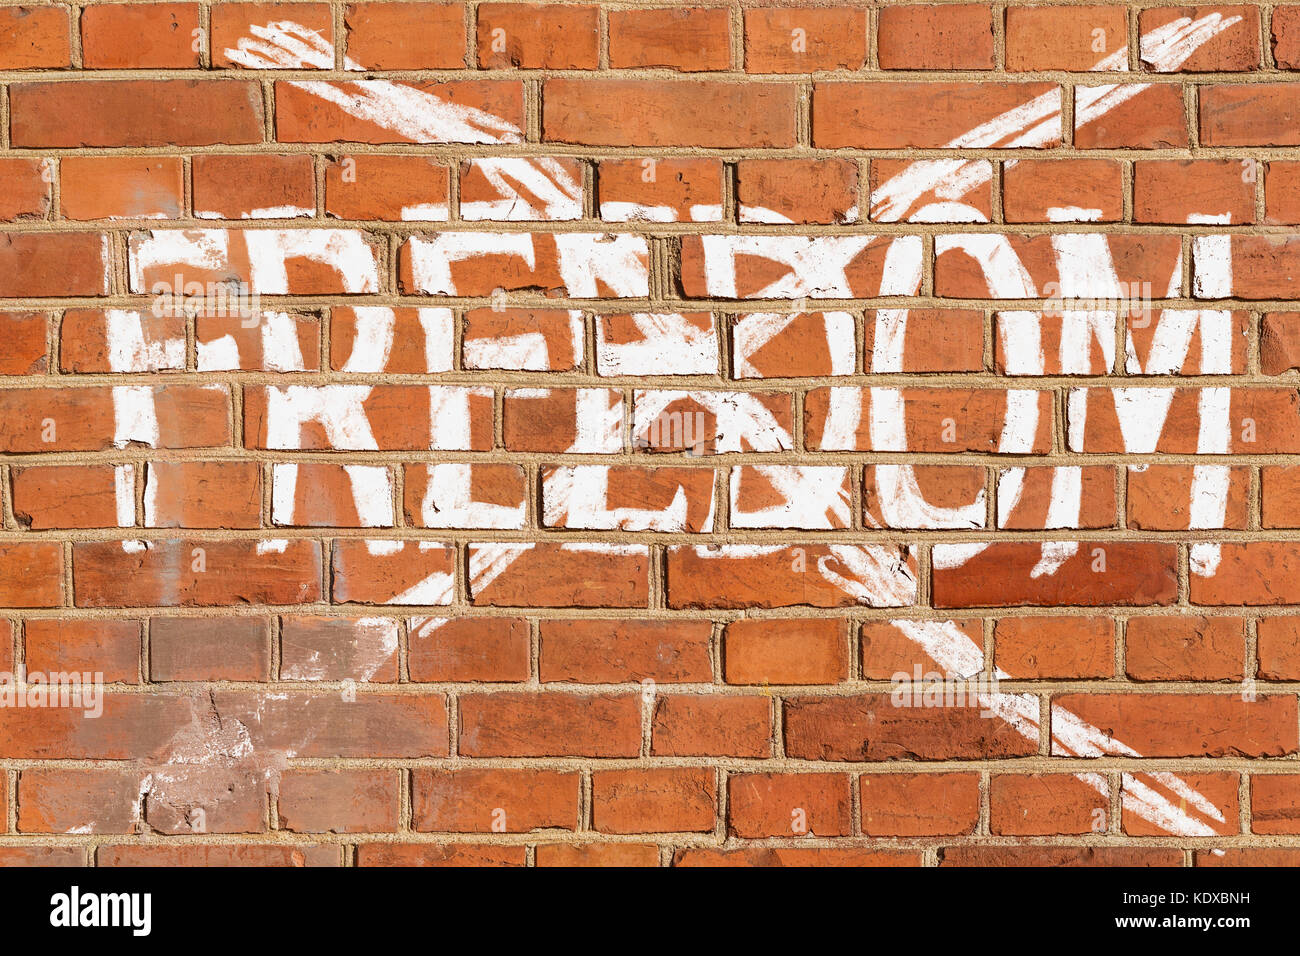 Brick wall with the crossed out word FREEDOM Stock Photo